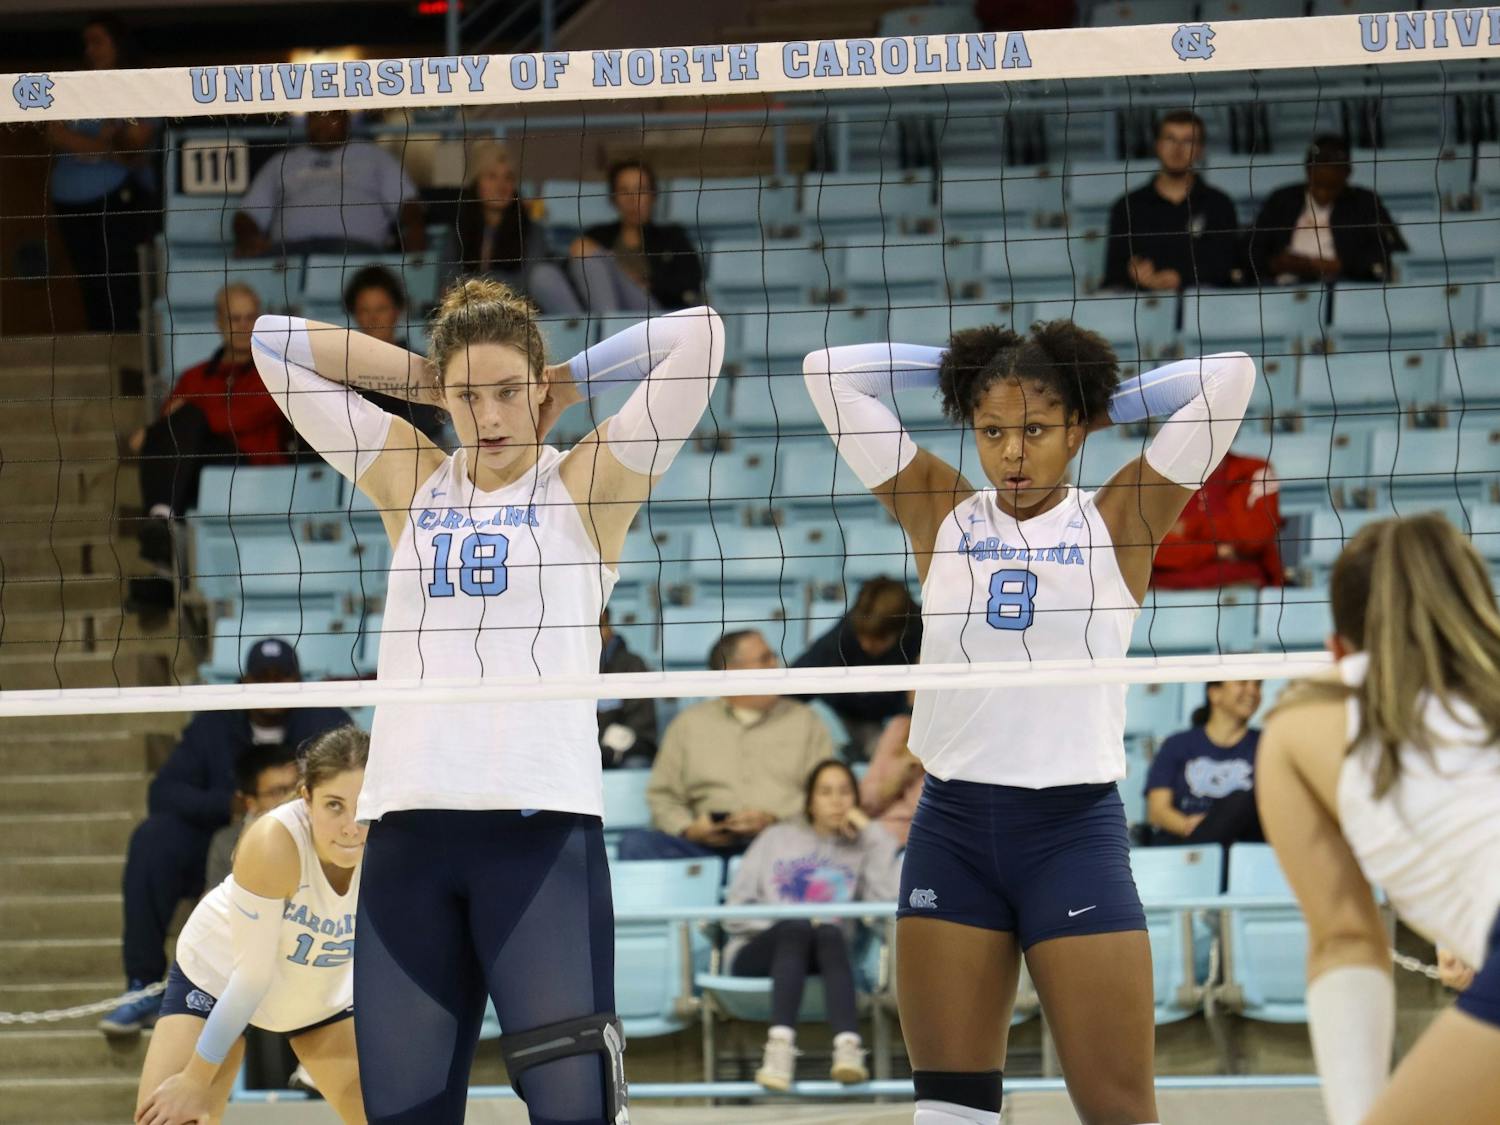 UNC freshman middle hitter Liv Mogridge (18) and senior middle hitter Skyy Howard (8) prepare for the next set during the volleyball match against Georgia Tech on Friday, Oct. 28, 2022 at Carmichael Arena. UNC lost 3-1.